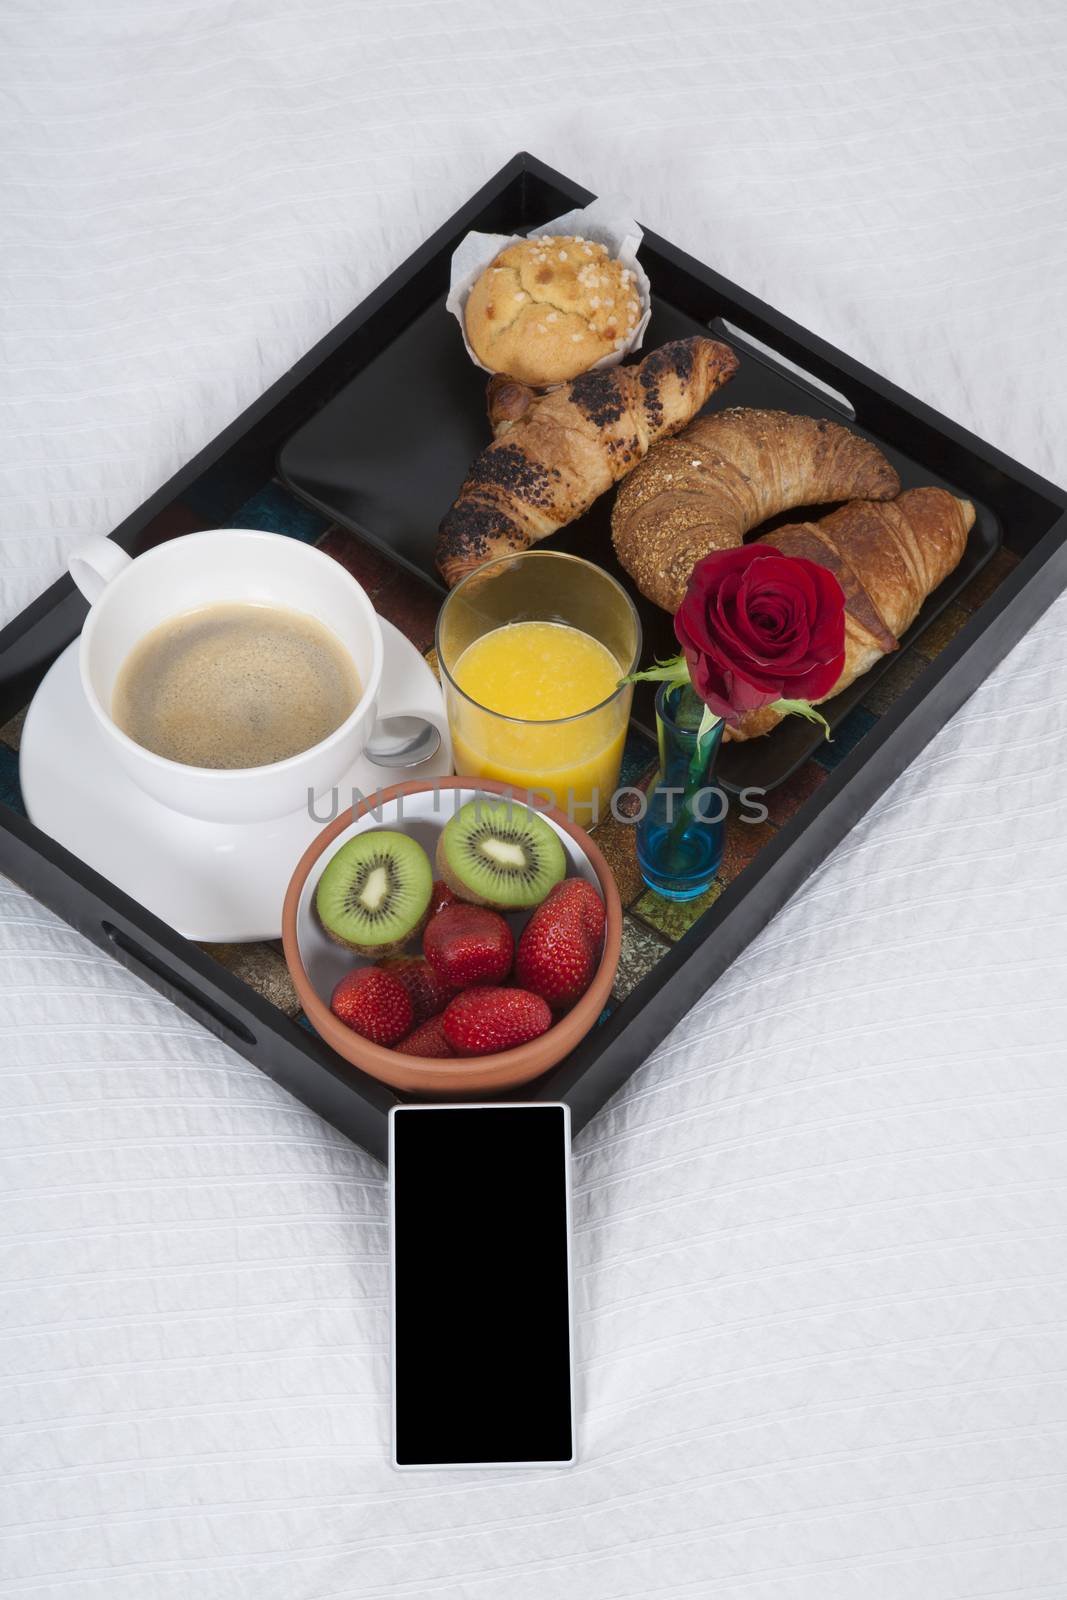 white quilt bed breakfast black tray croissants orange juice strawberry kiwi cupcake red rose flower and smartphone blank screen